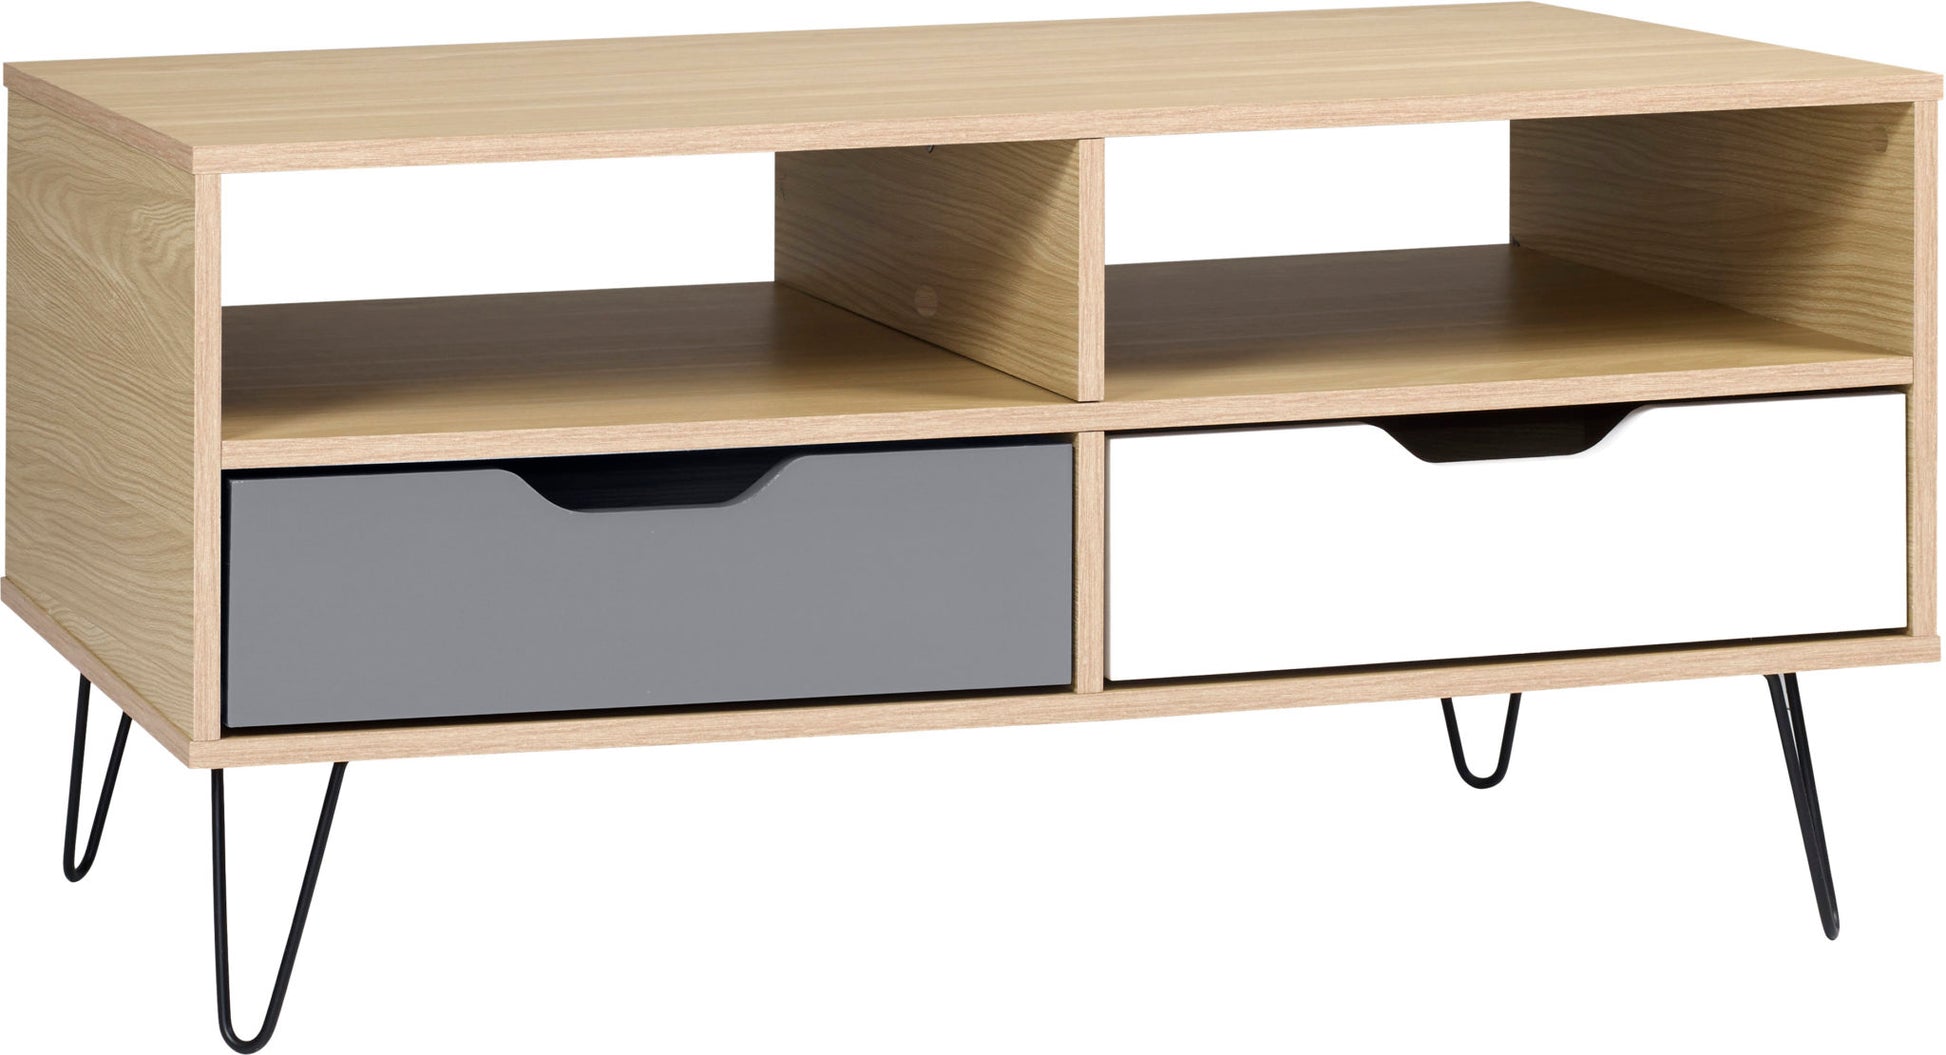 Bergen 2 Drawer Coffee Table- Oak Effect/White/Grey- The Right Buy Store